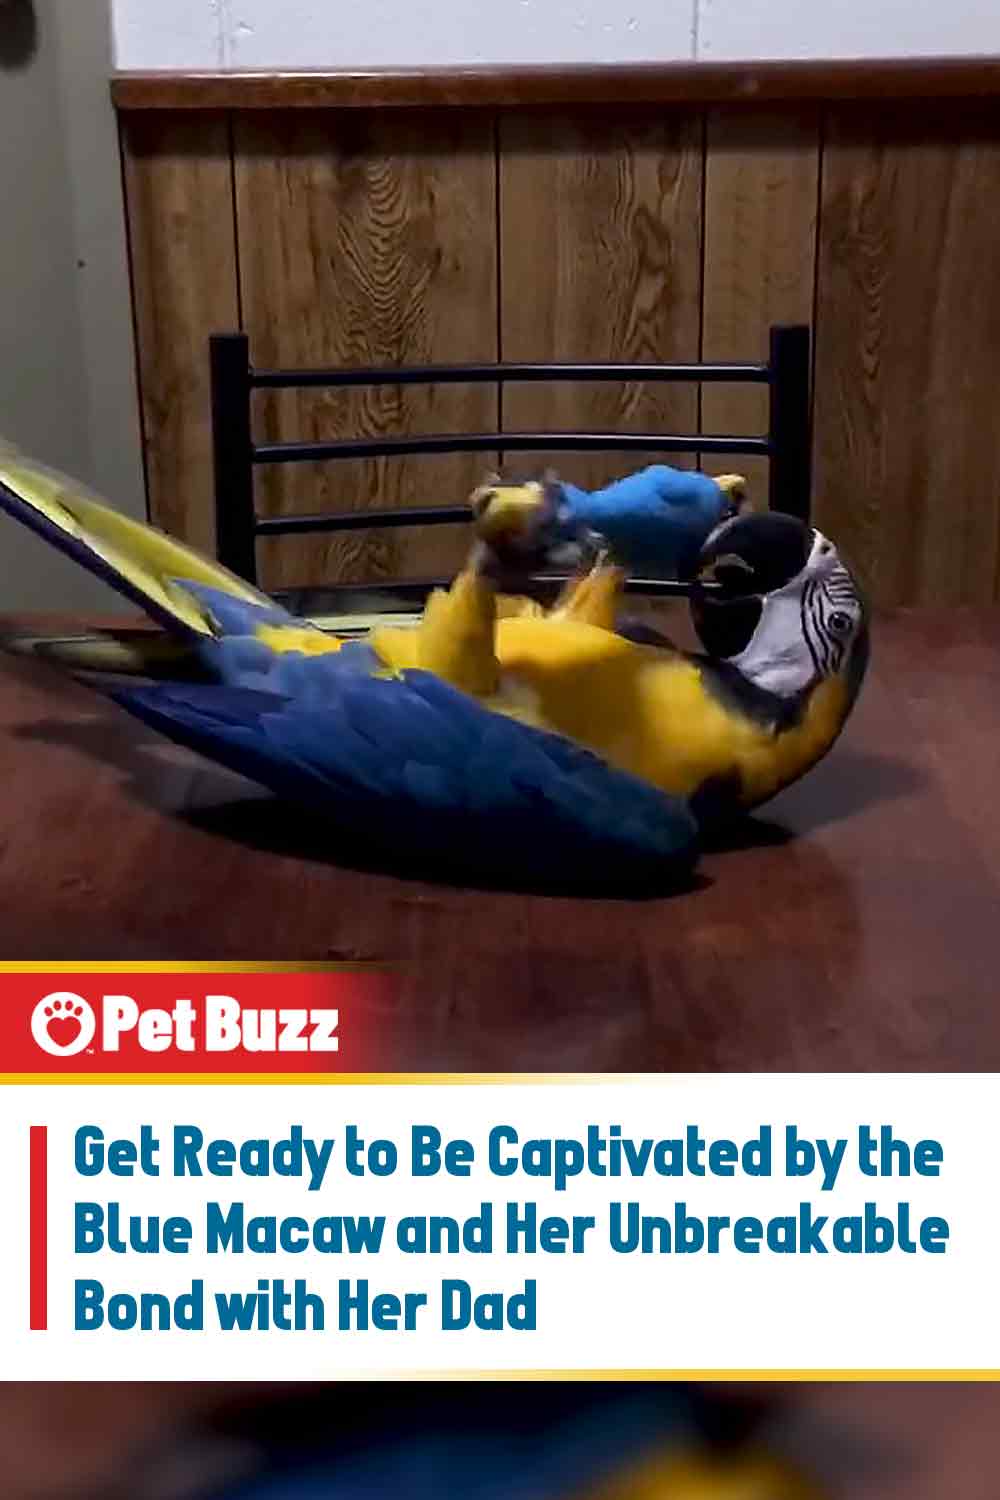 Get Ready to Be Captivated by the Blue Macaw and Her Unbreakable Bond with Her Dad